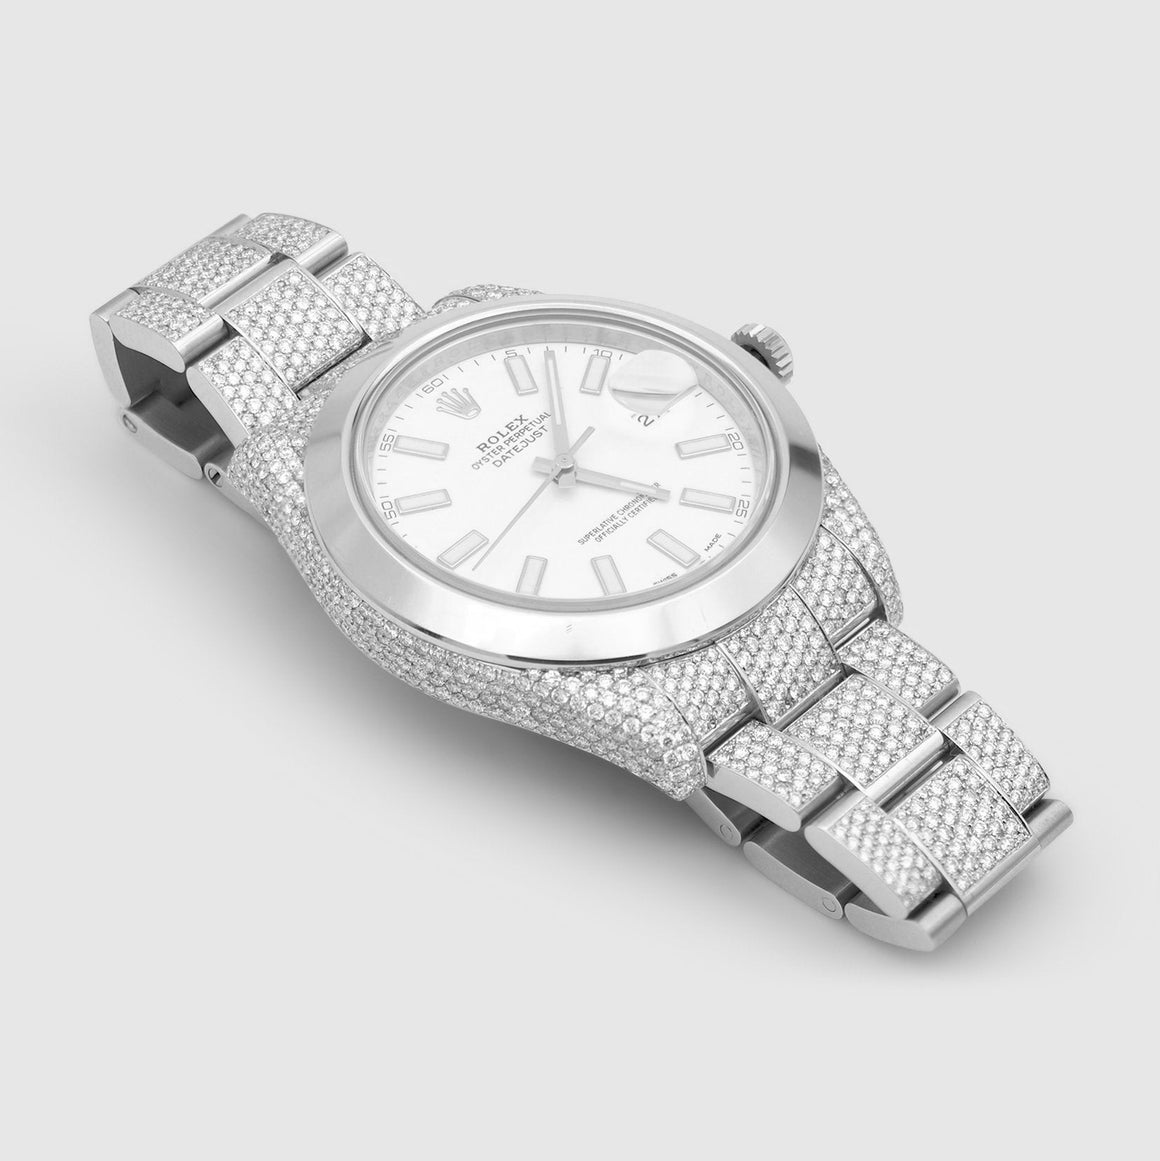 Iced Out DateJust II 41mm Stainless Steel White Dial Watch